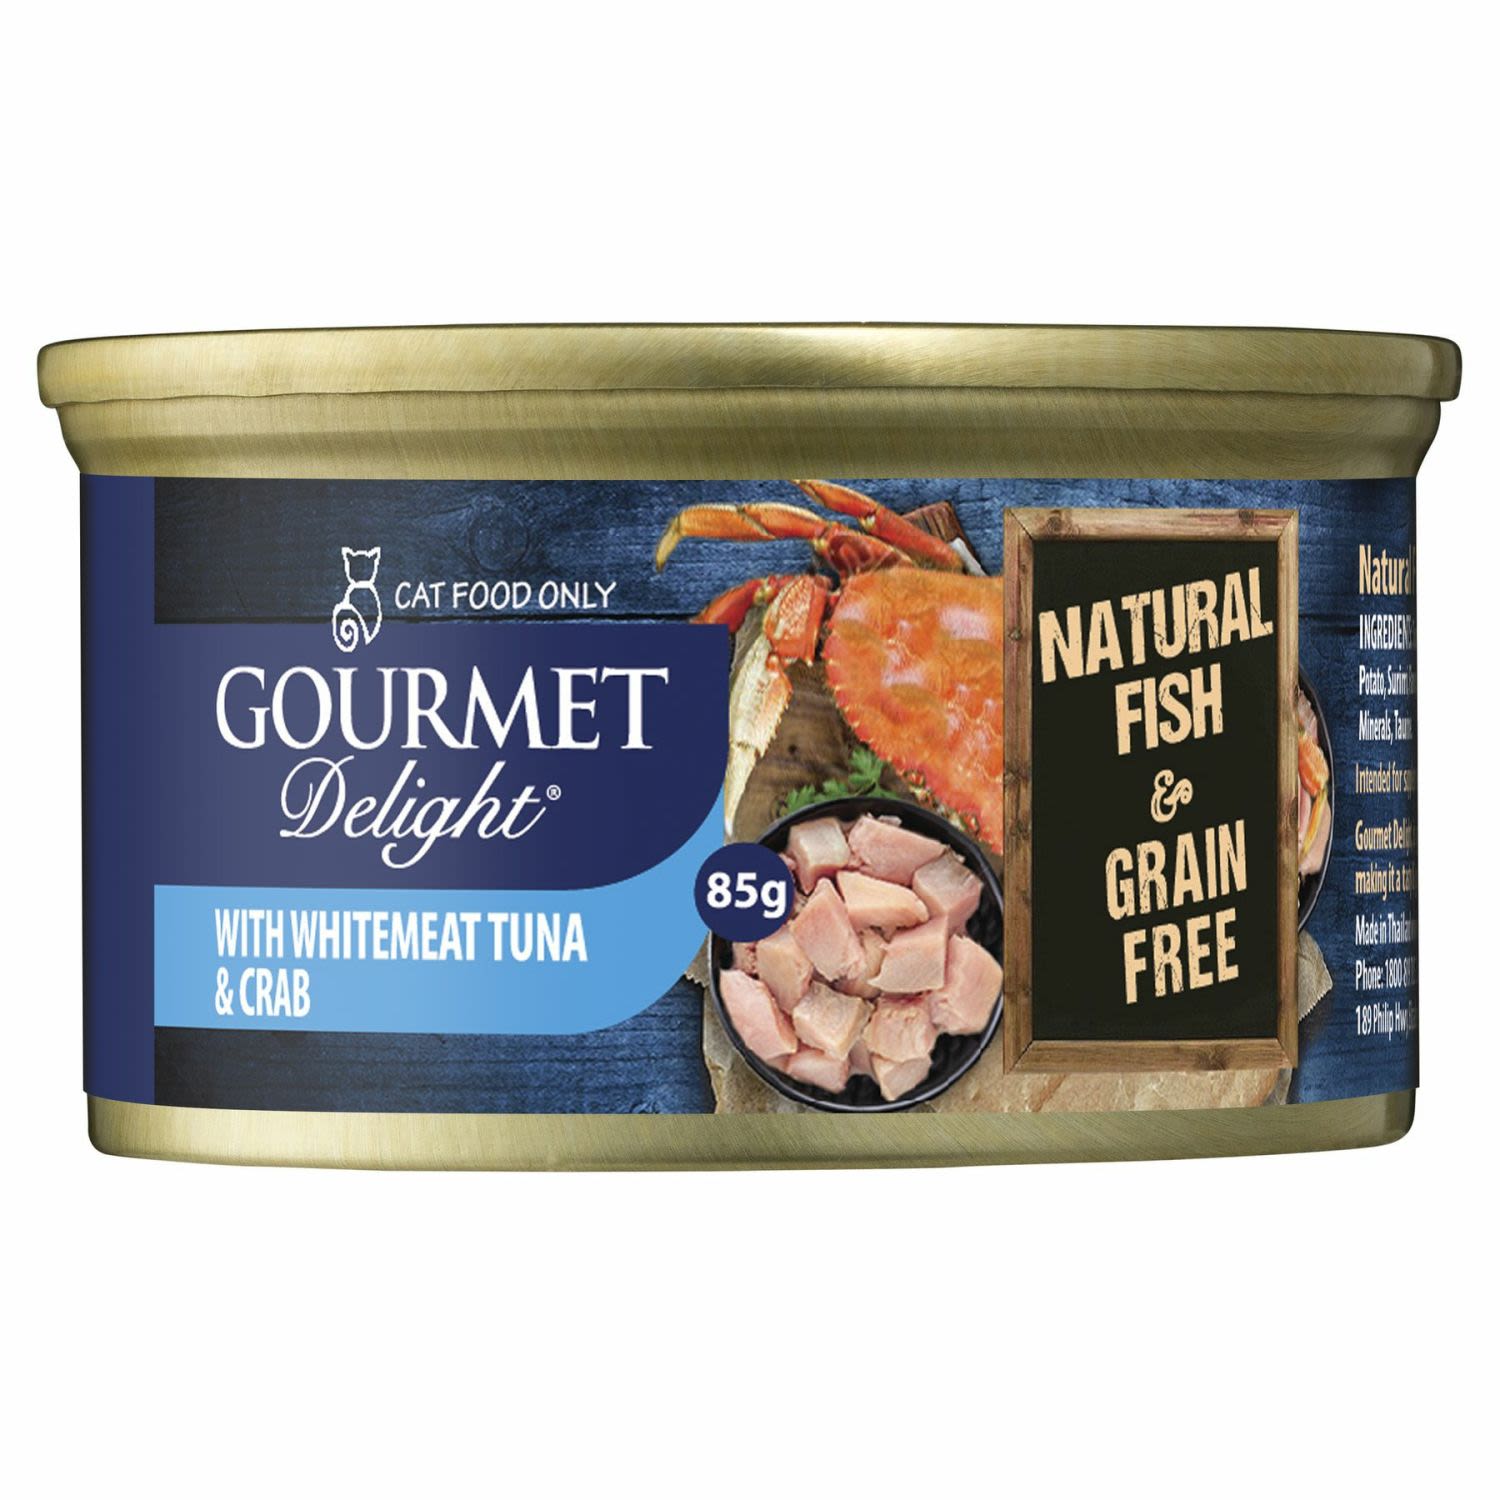 Gourmet Delight with Whitemeat Tuna & Crab, 85 Gram